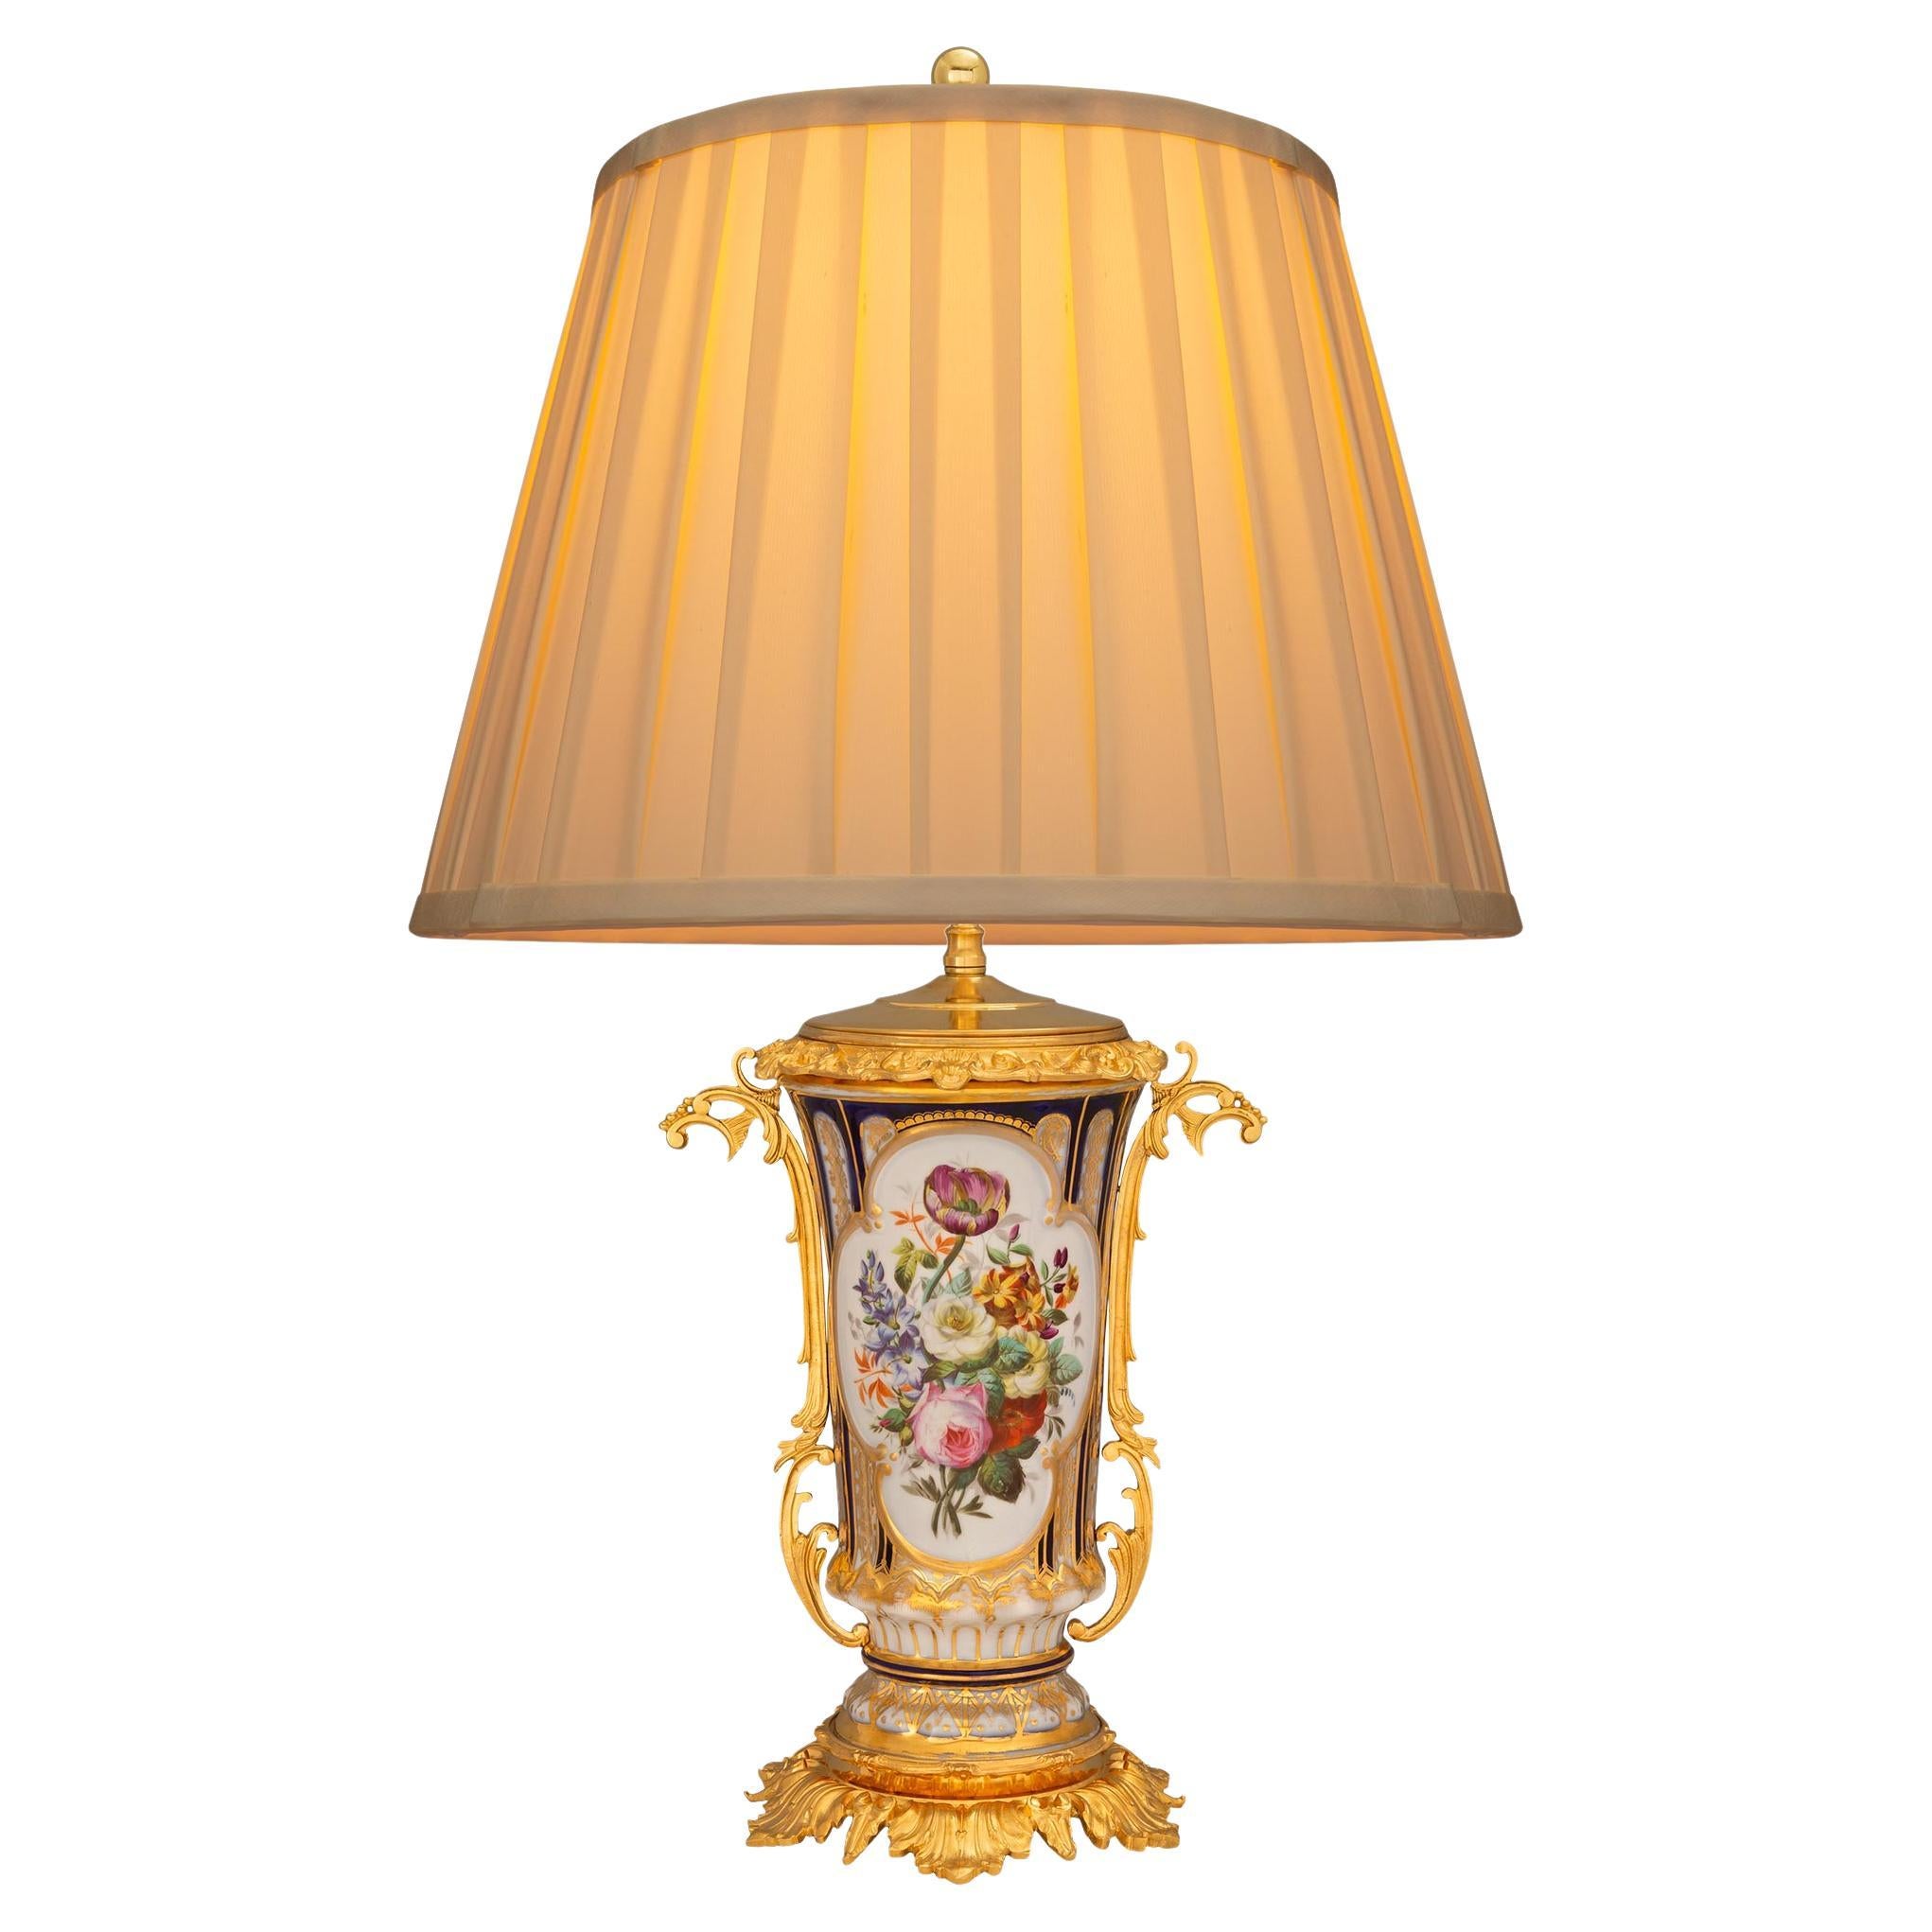 Continental 19th Century Louis XV St. Porcelain And Ormolu Lamp For Sale